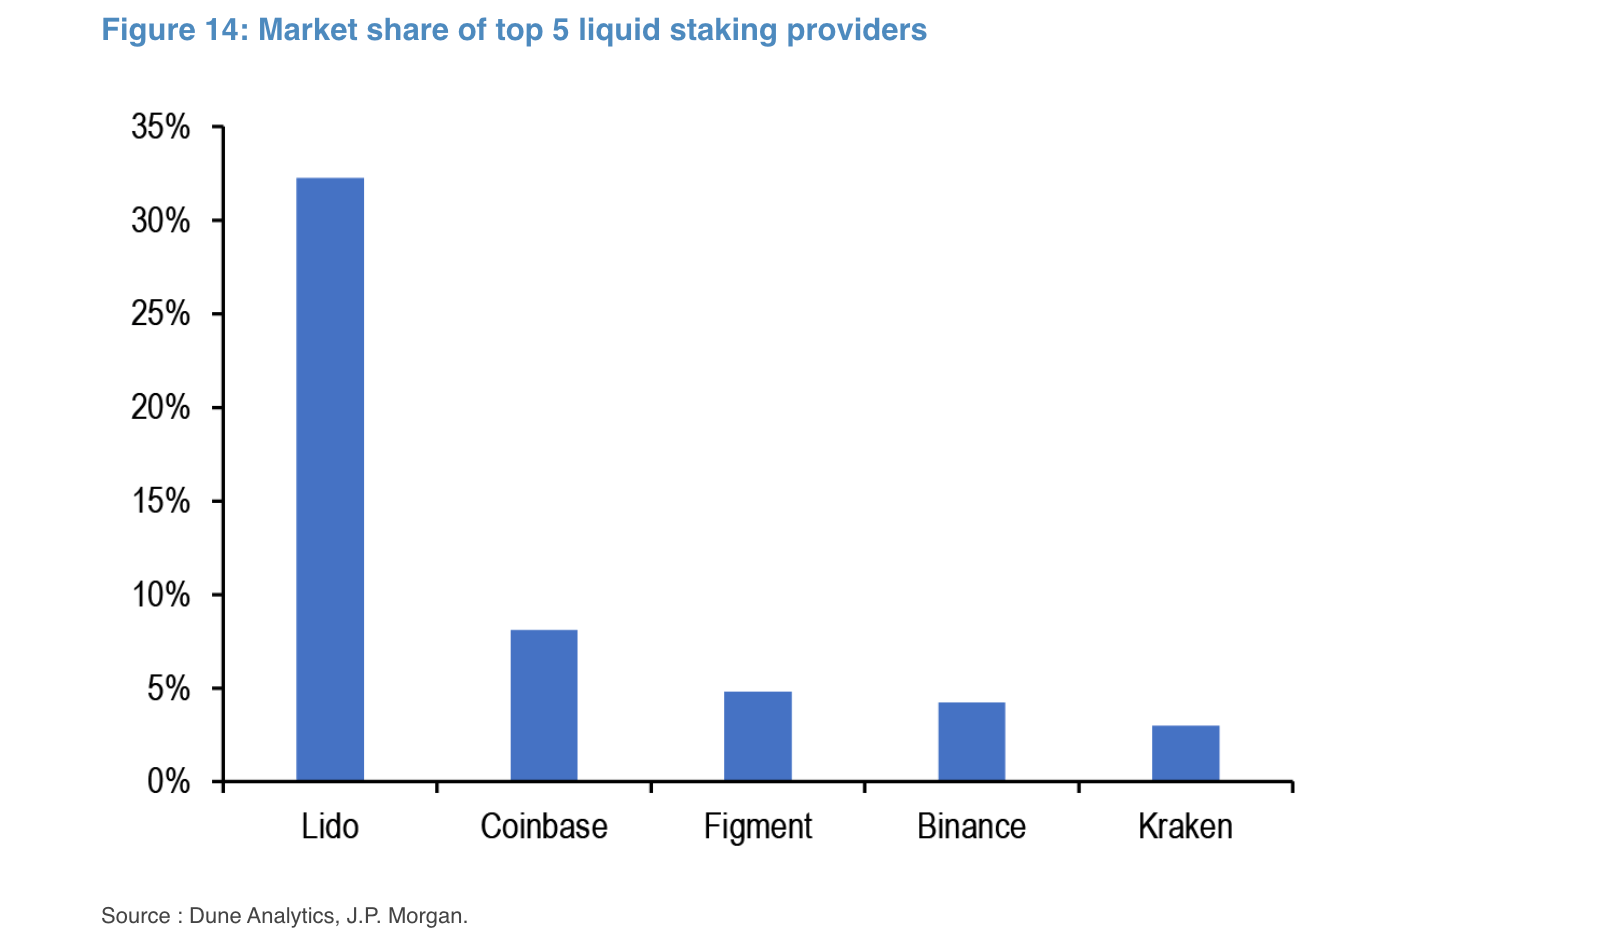 Performance of Top 5 liquid staking providers.